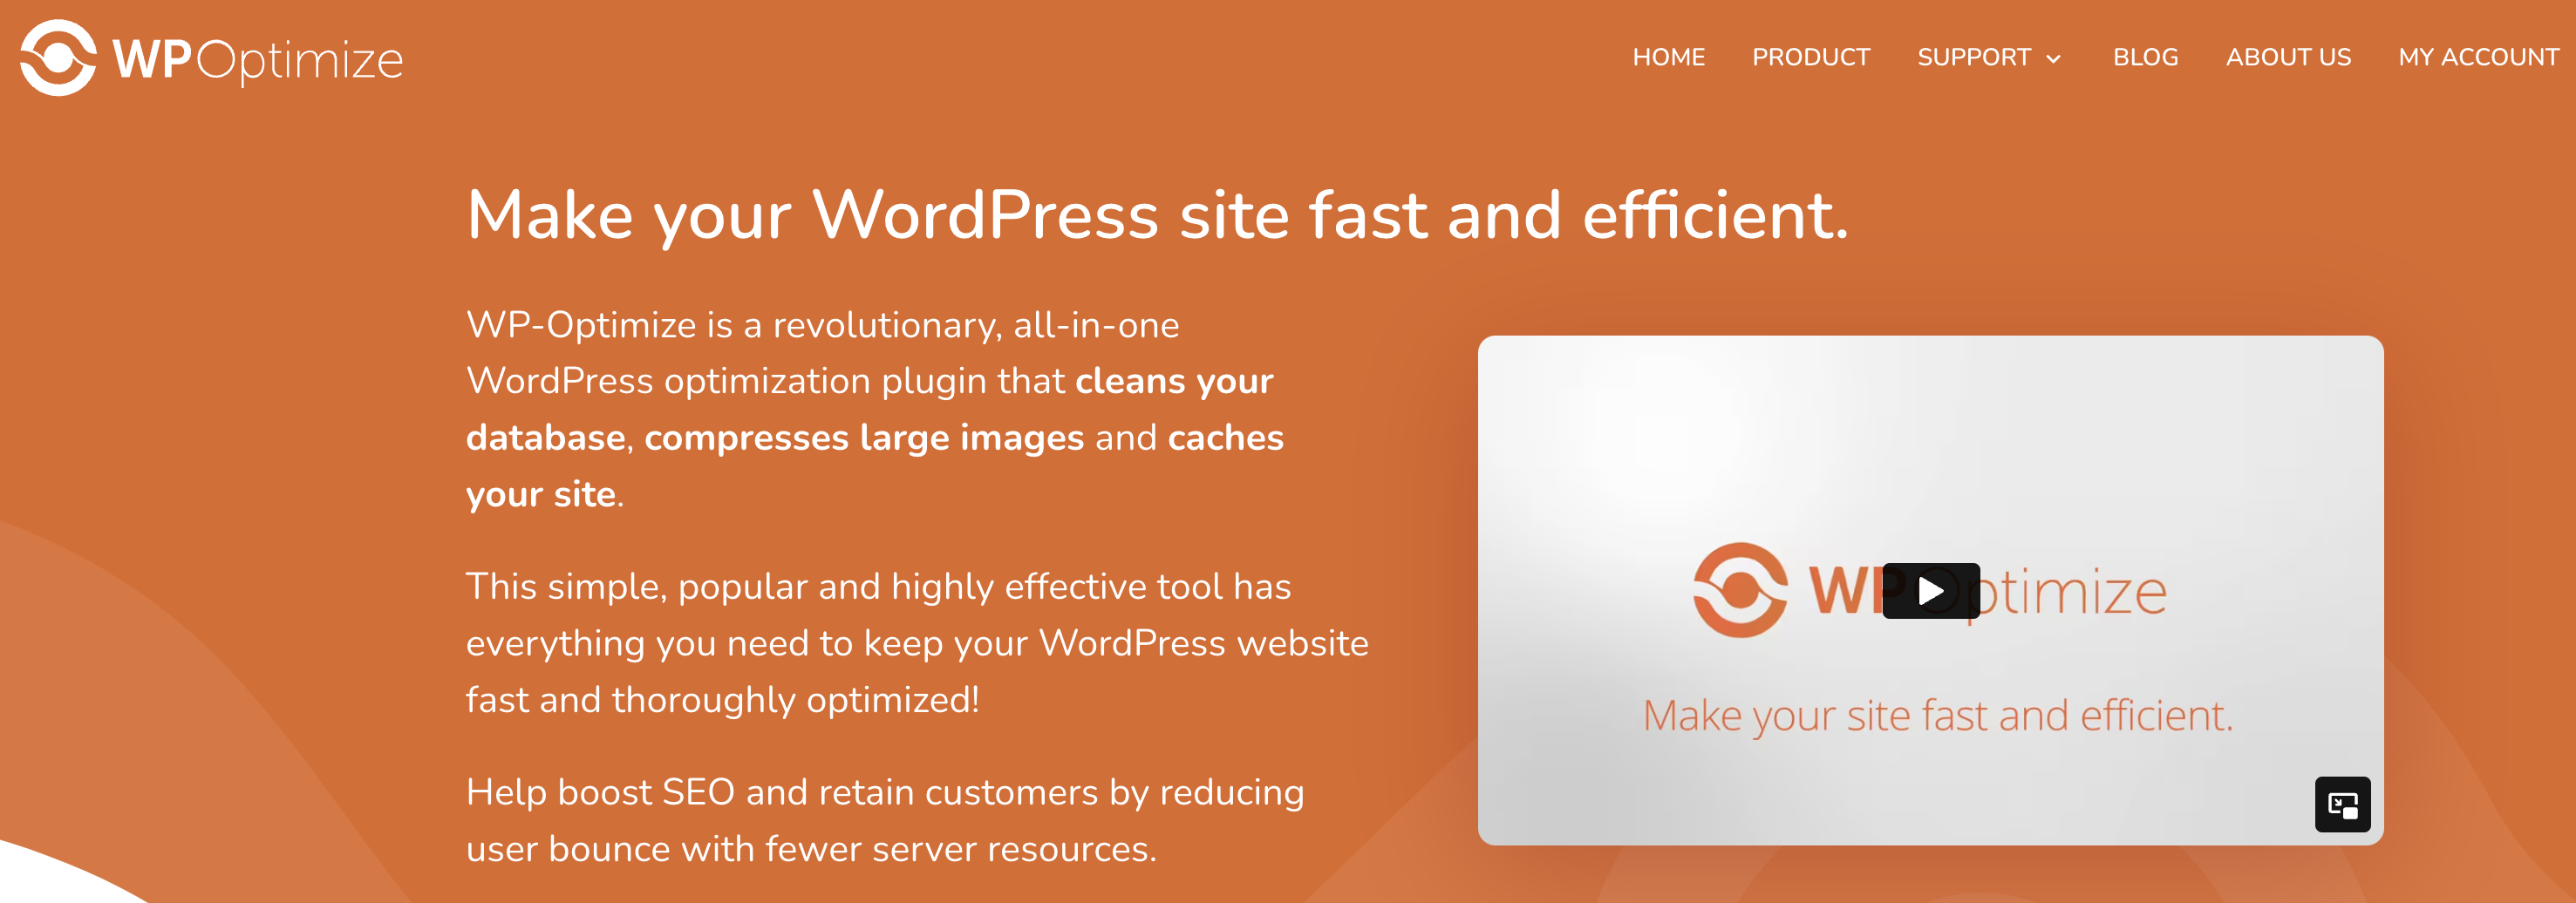 Make your WordPress site fast and efficient